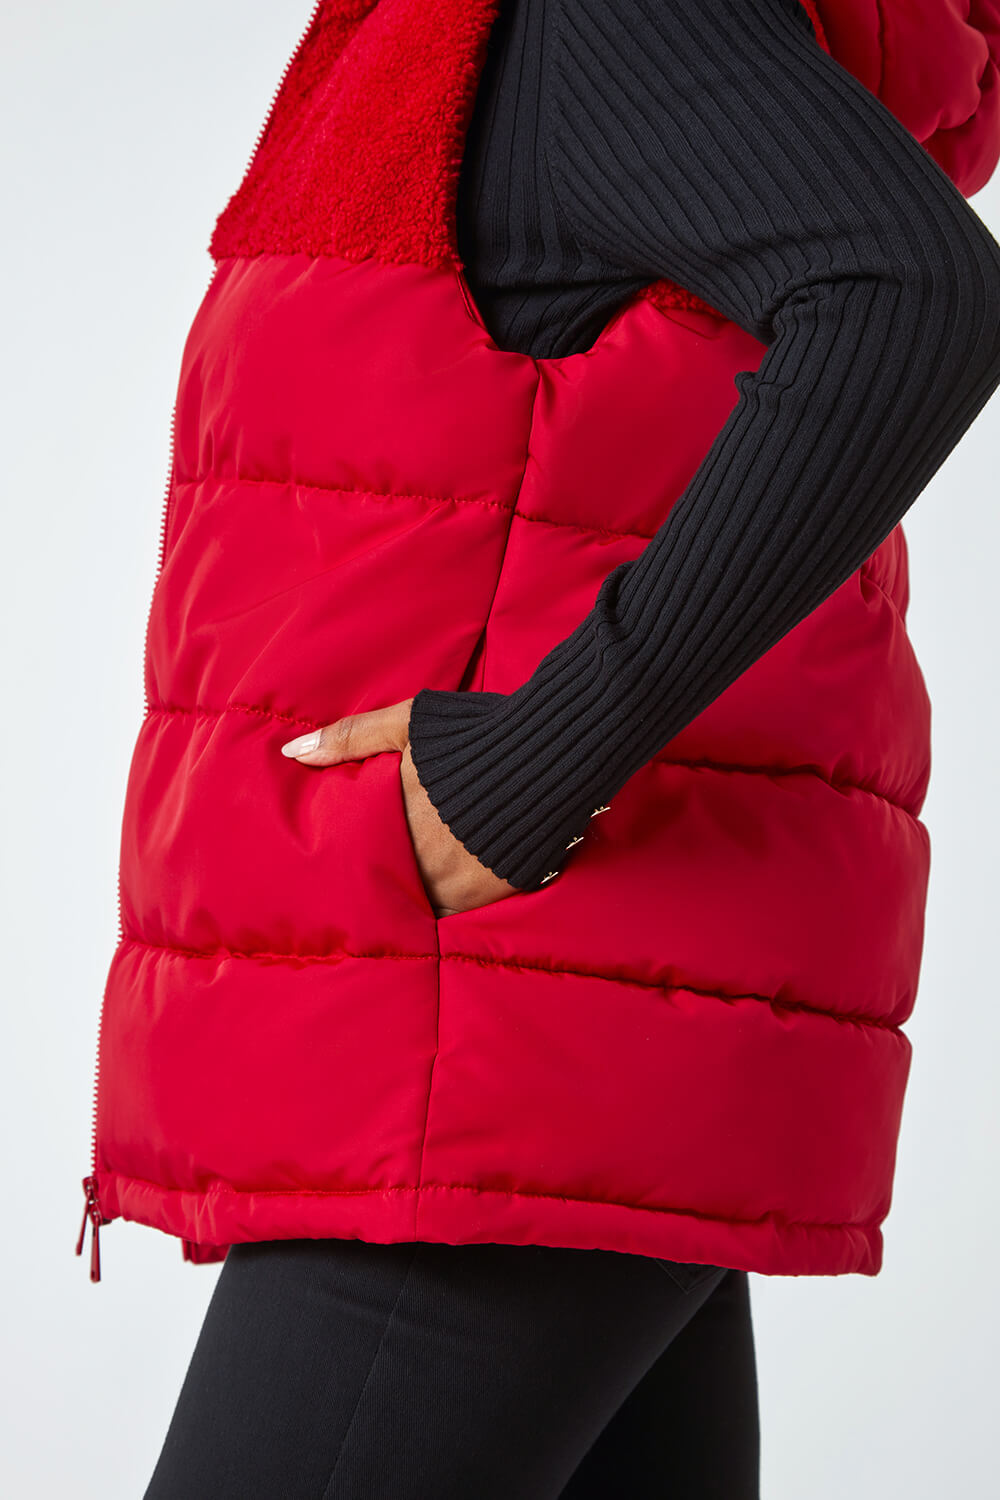 Red Petite Borg Detail Hooded Padded Gilet, Image 5 of 5